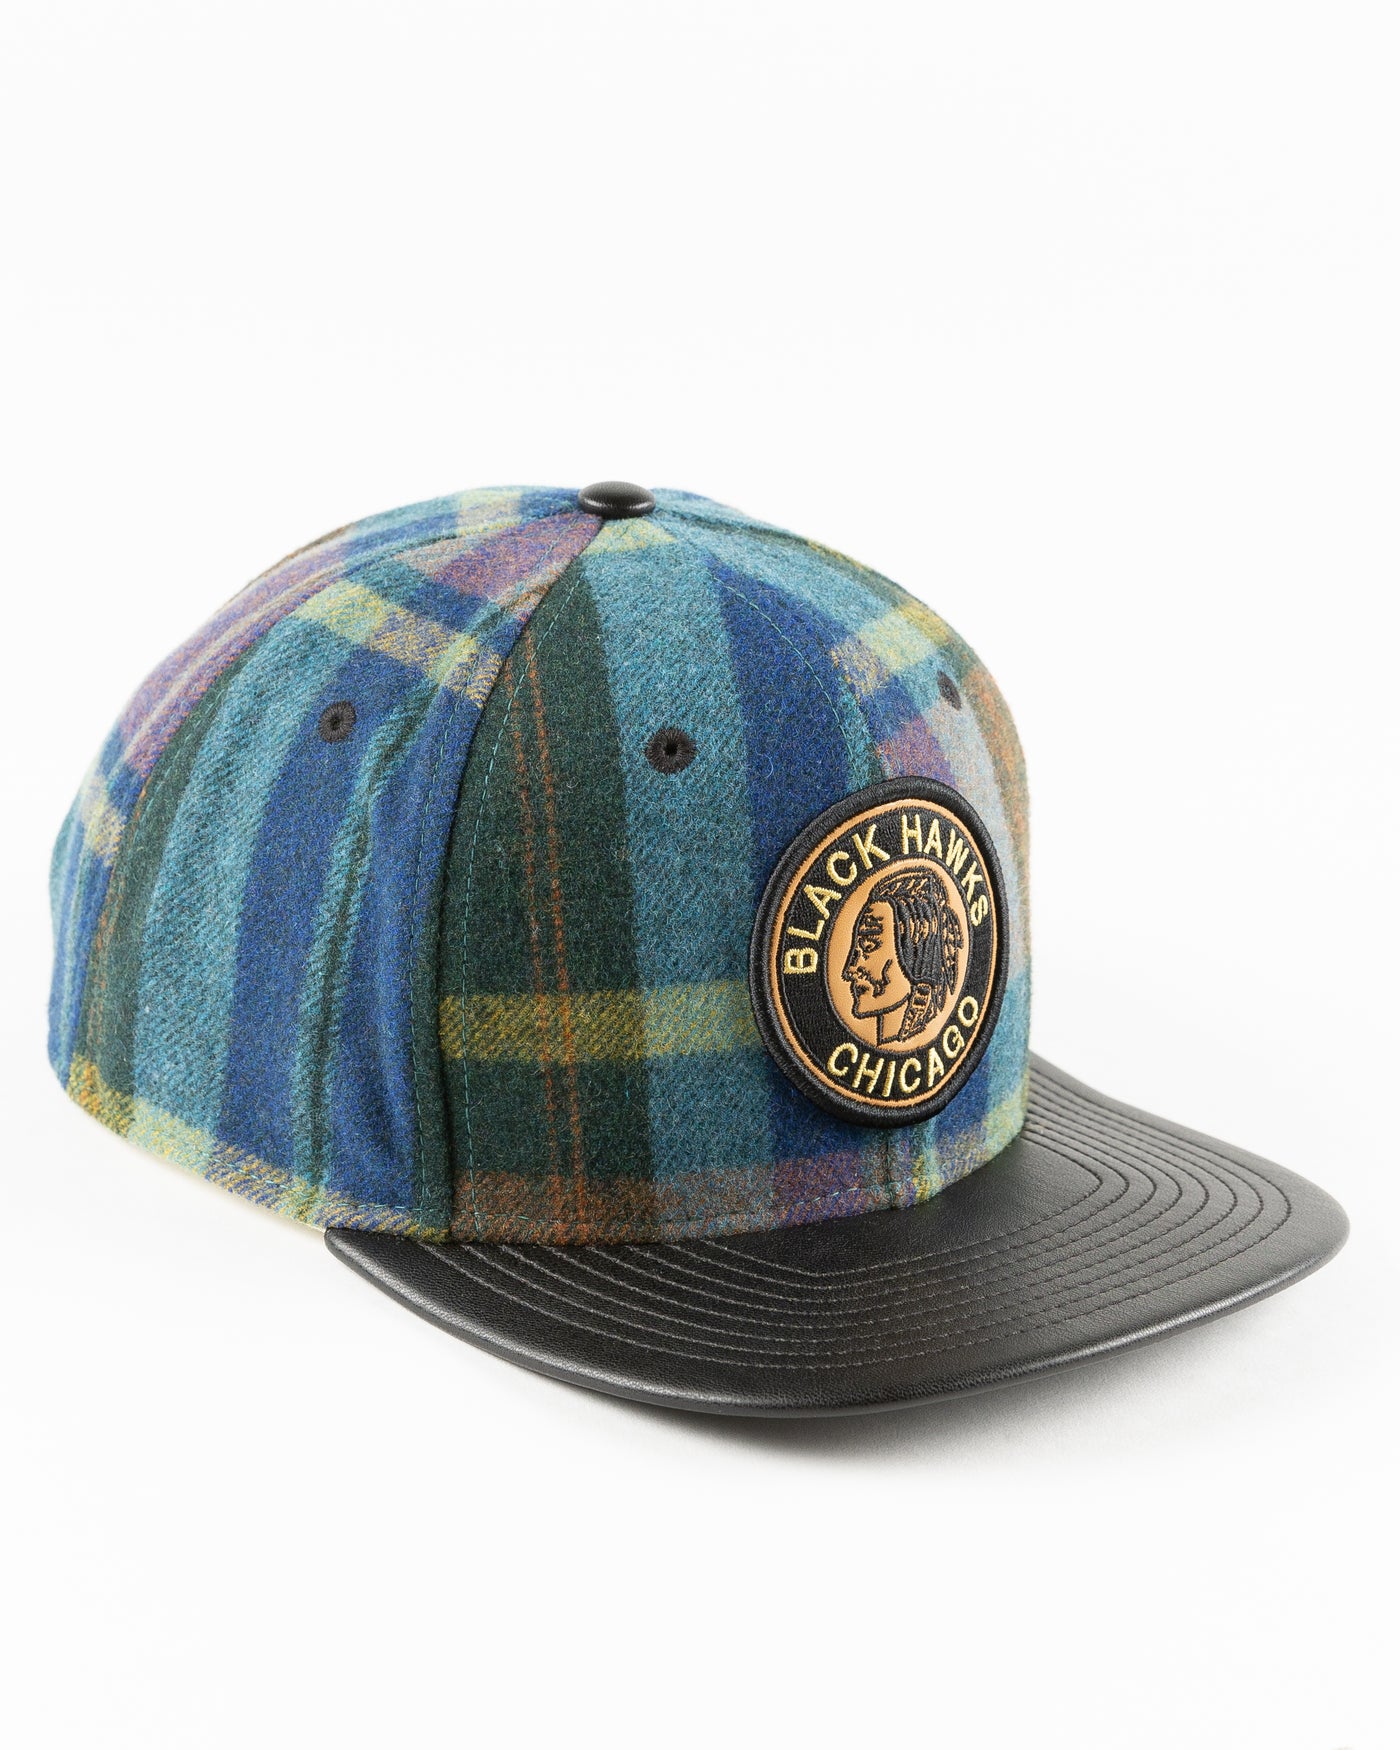 New Era snapback with wool checker crown and vintage Chicago Blackhawks logo and leather flat brim - right angle lay flat